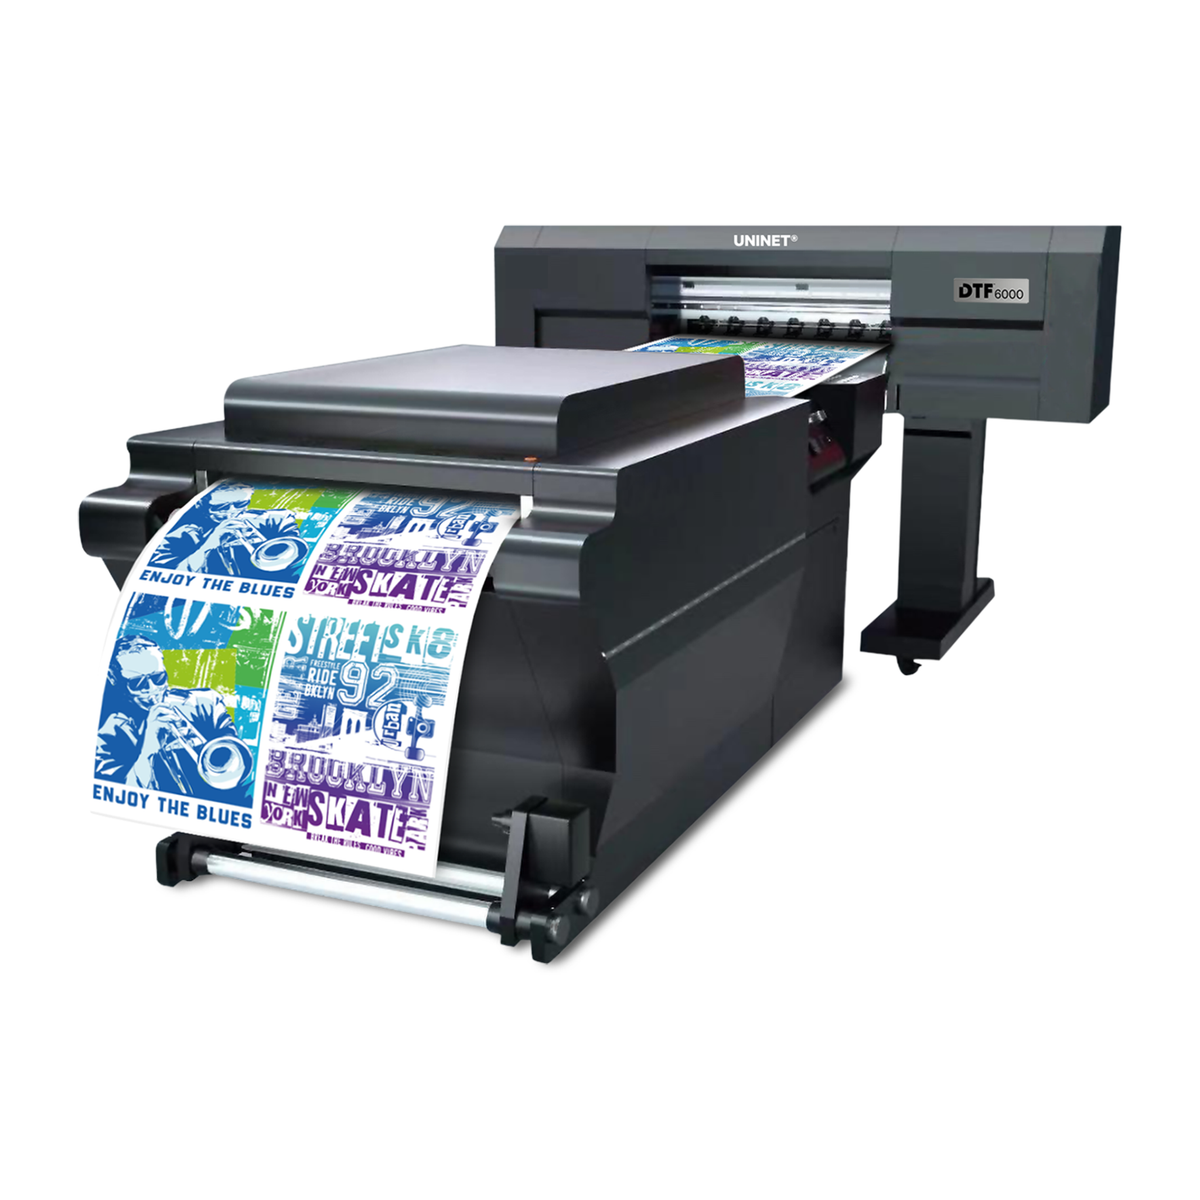 DTF 6000 Printer - Deluxe Package with Hotronix Hover Heat Press 16” x 24”